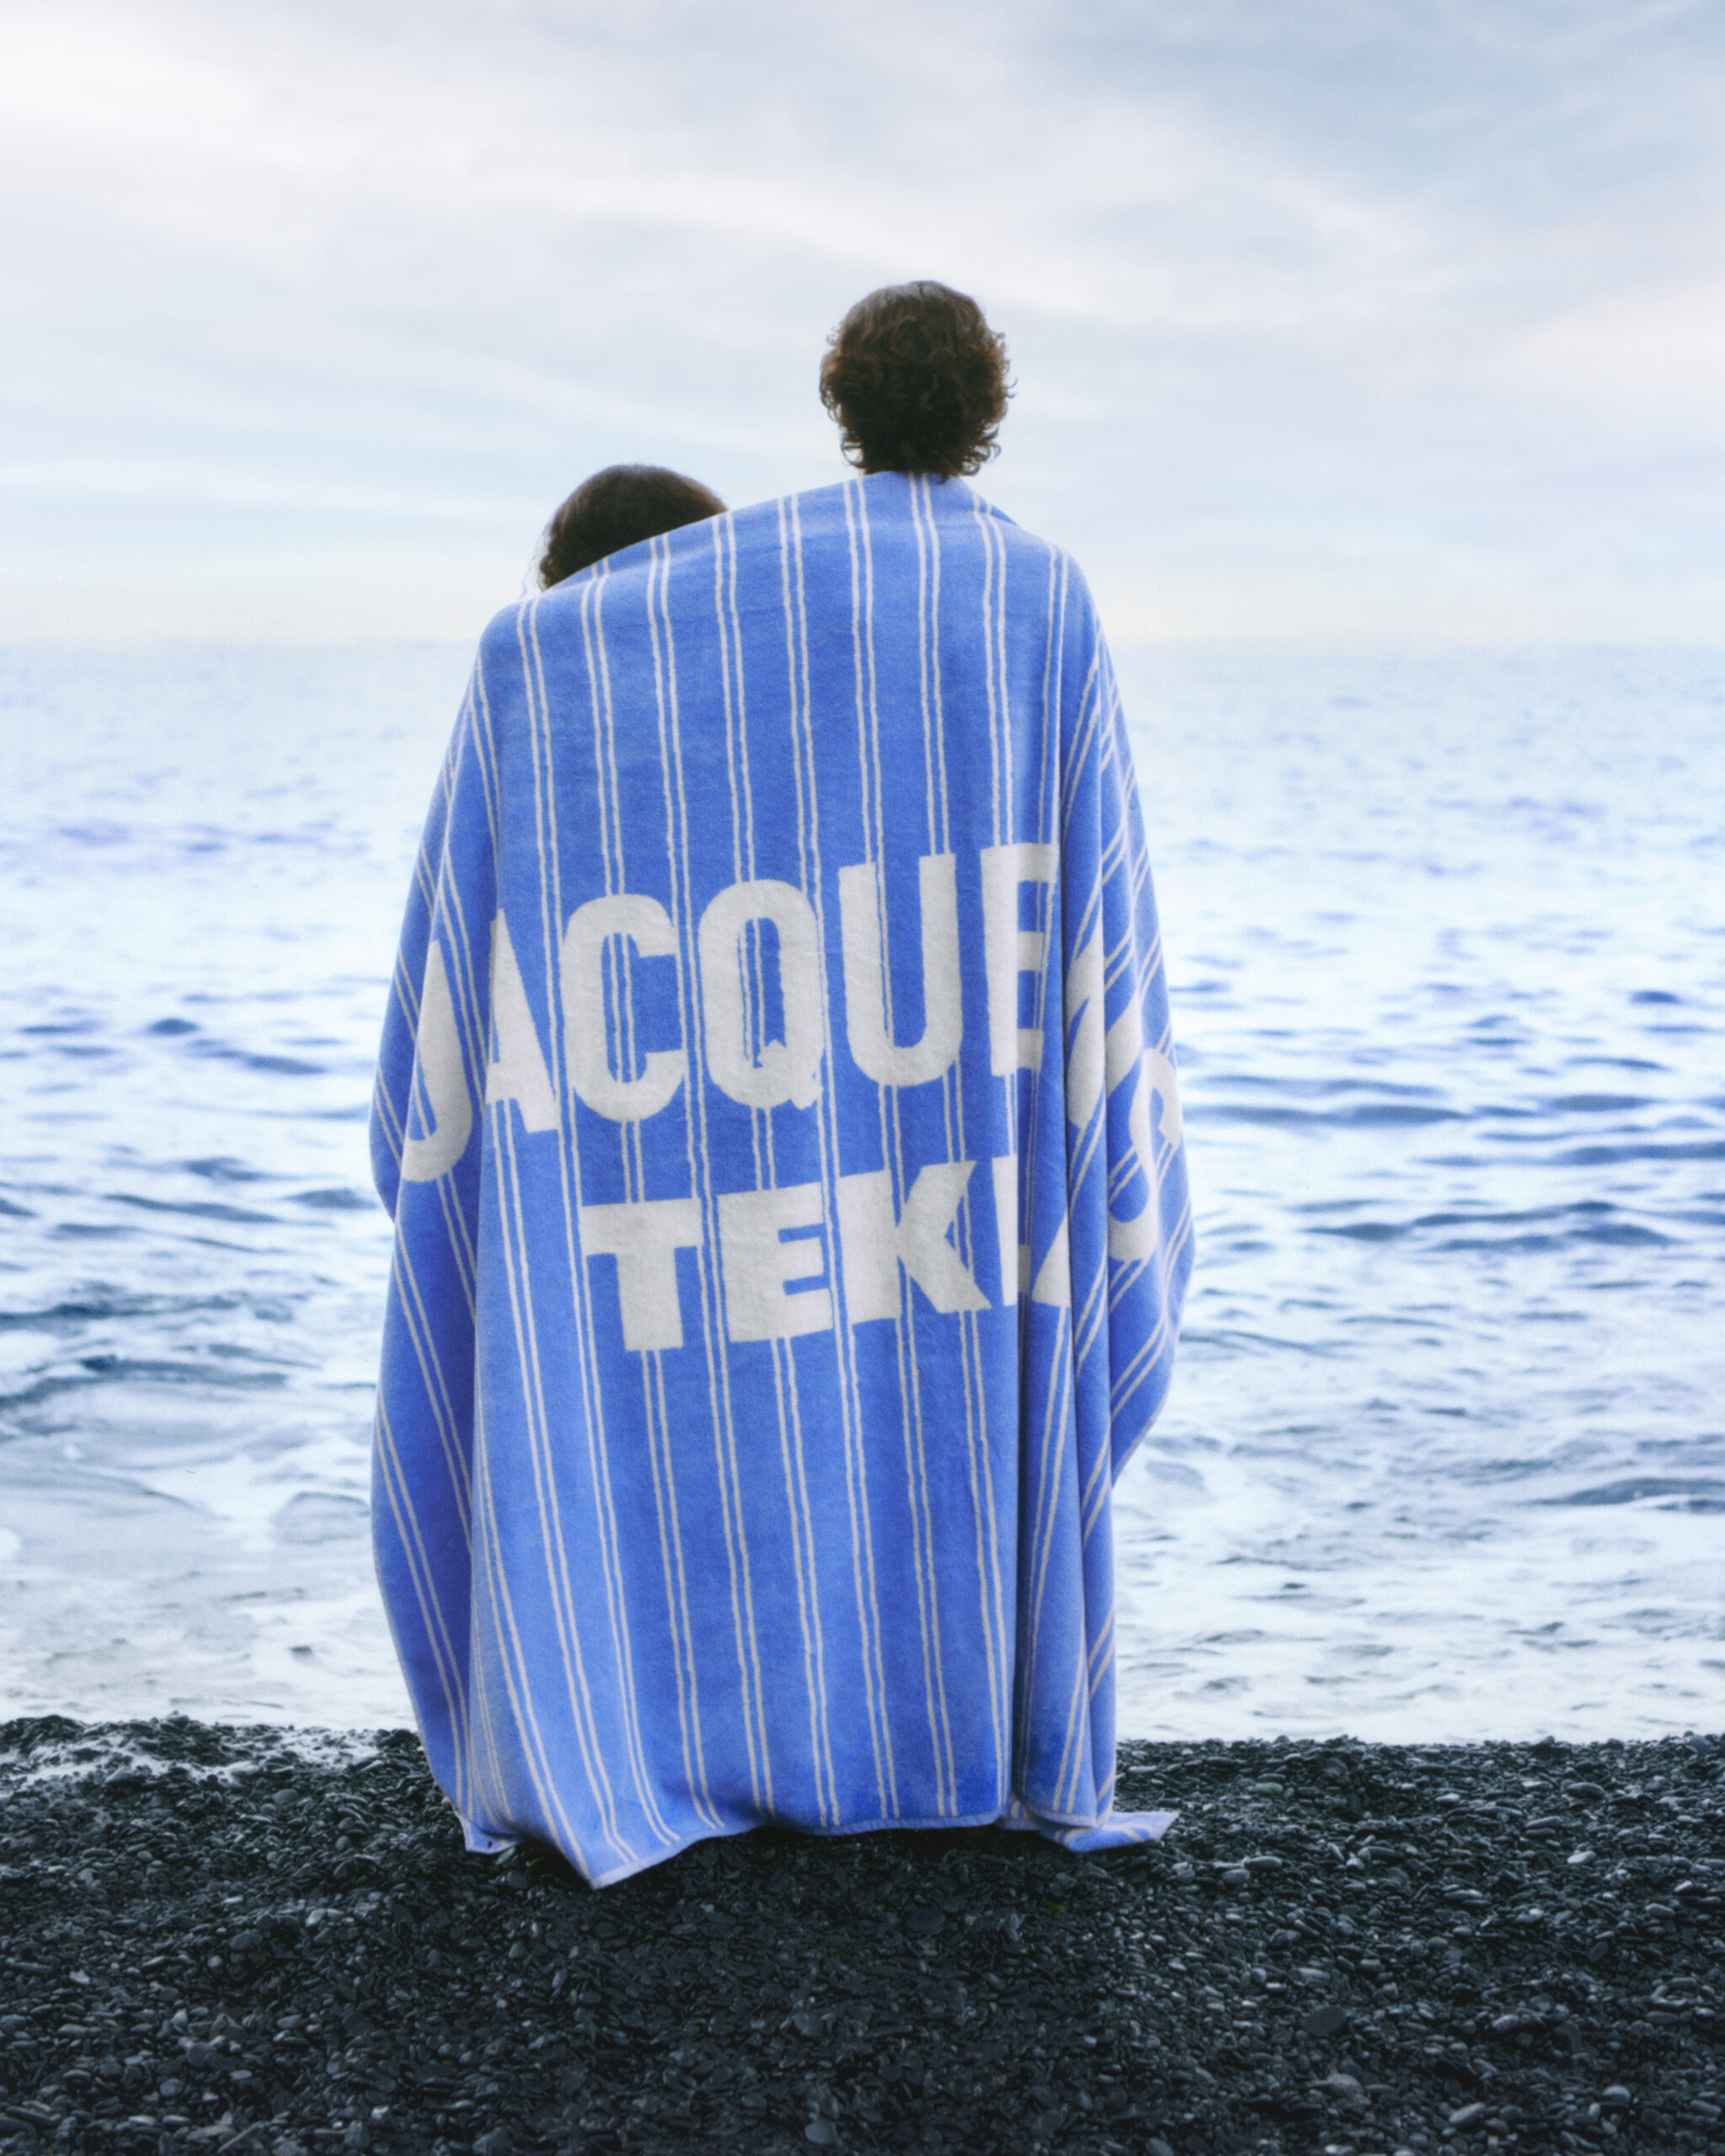 Tekla and Jacquemus Team Up for a Playful Home Textiles and